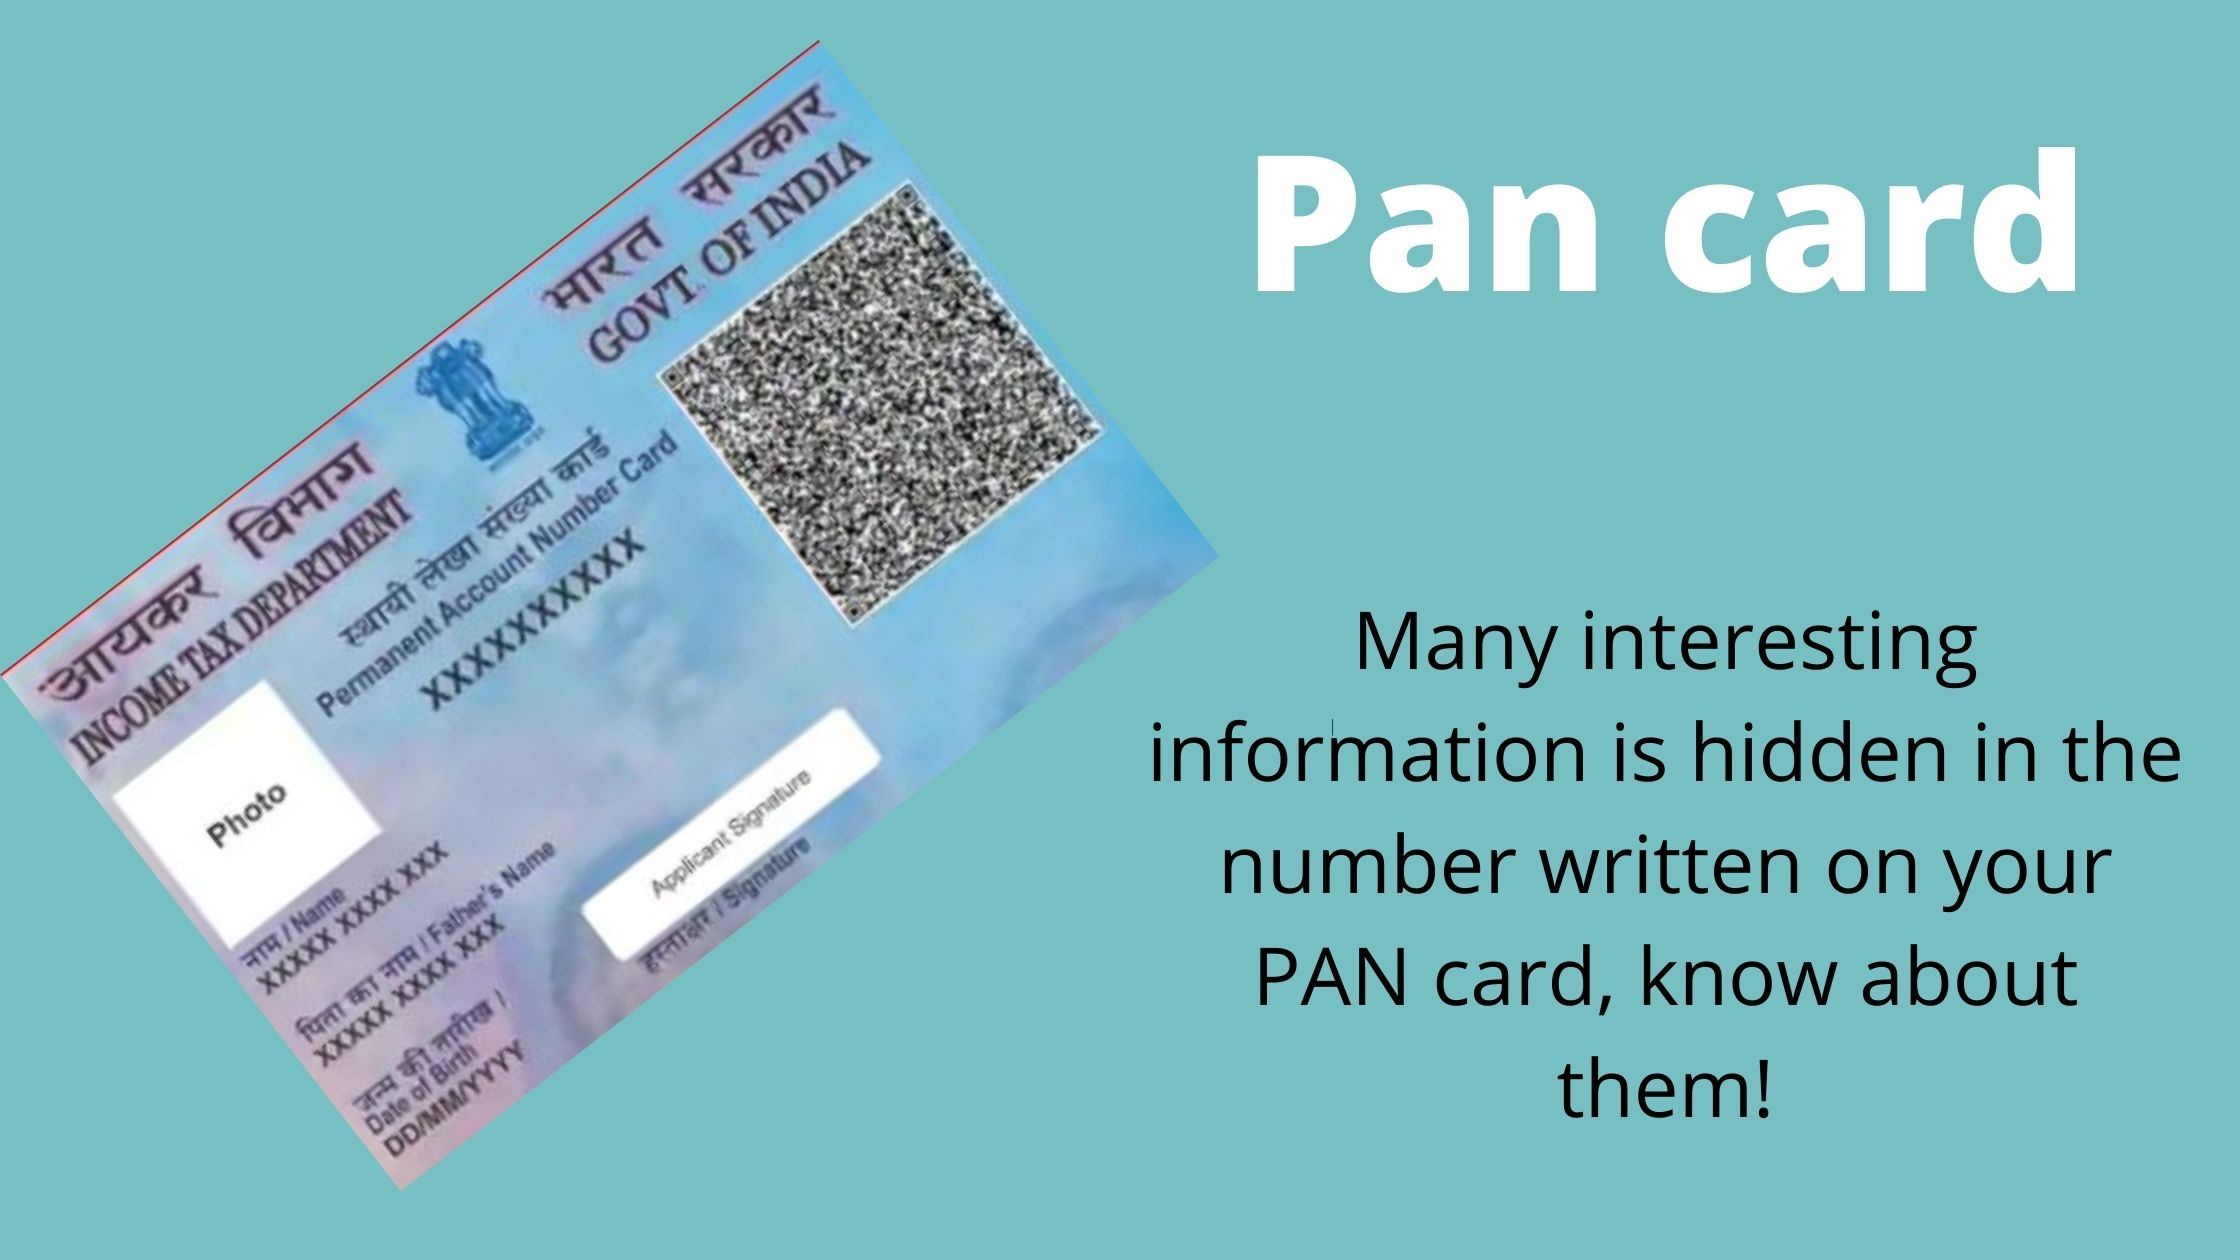 Many interesting information is hidden in the number written on your PAN card, know about them!